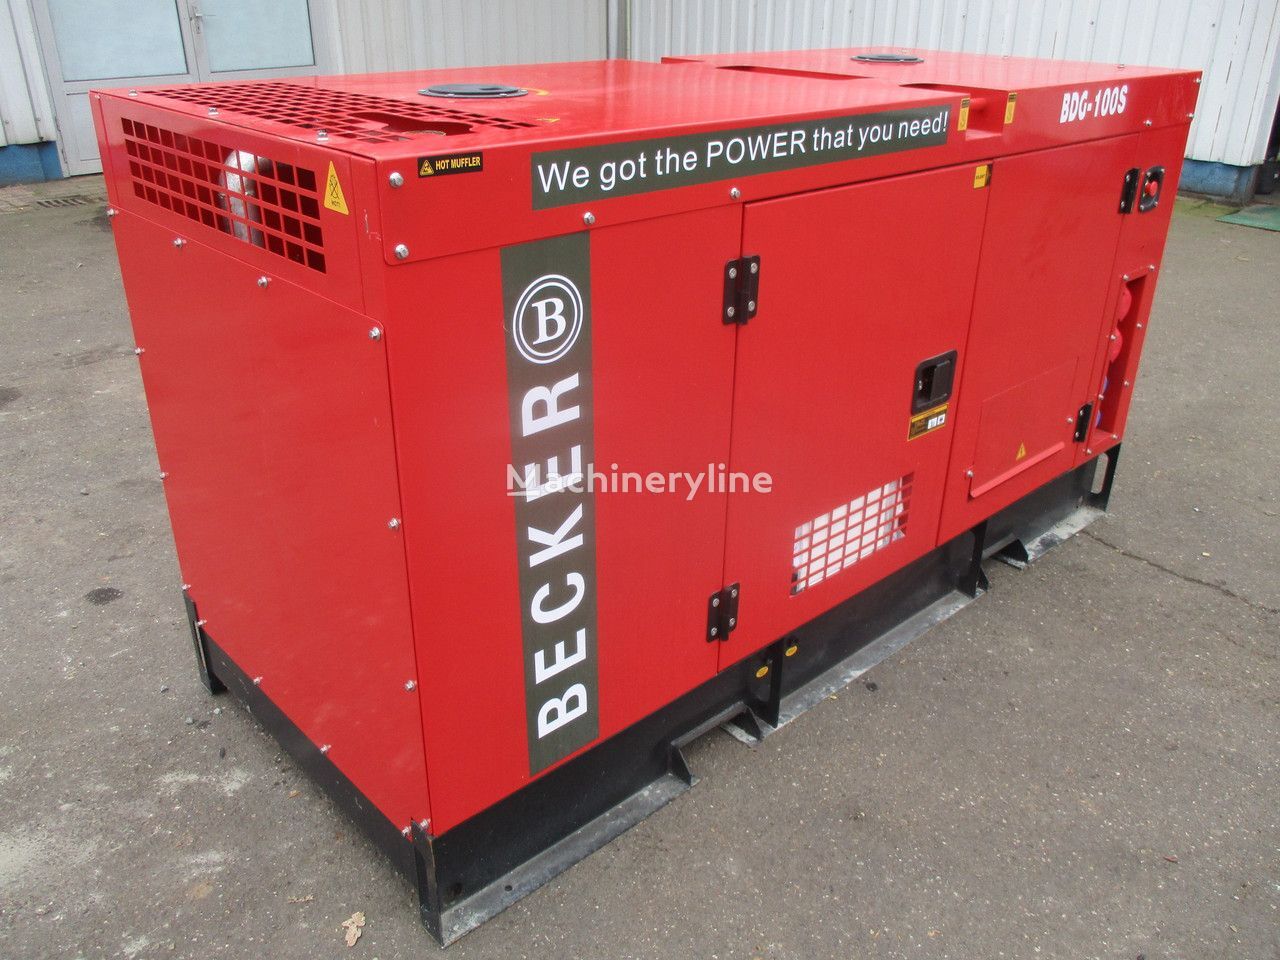 new Becker BDG-100S , New Diesel generator , 100 KVA, 3 Phase, 2 Pieces in